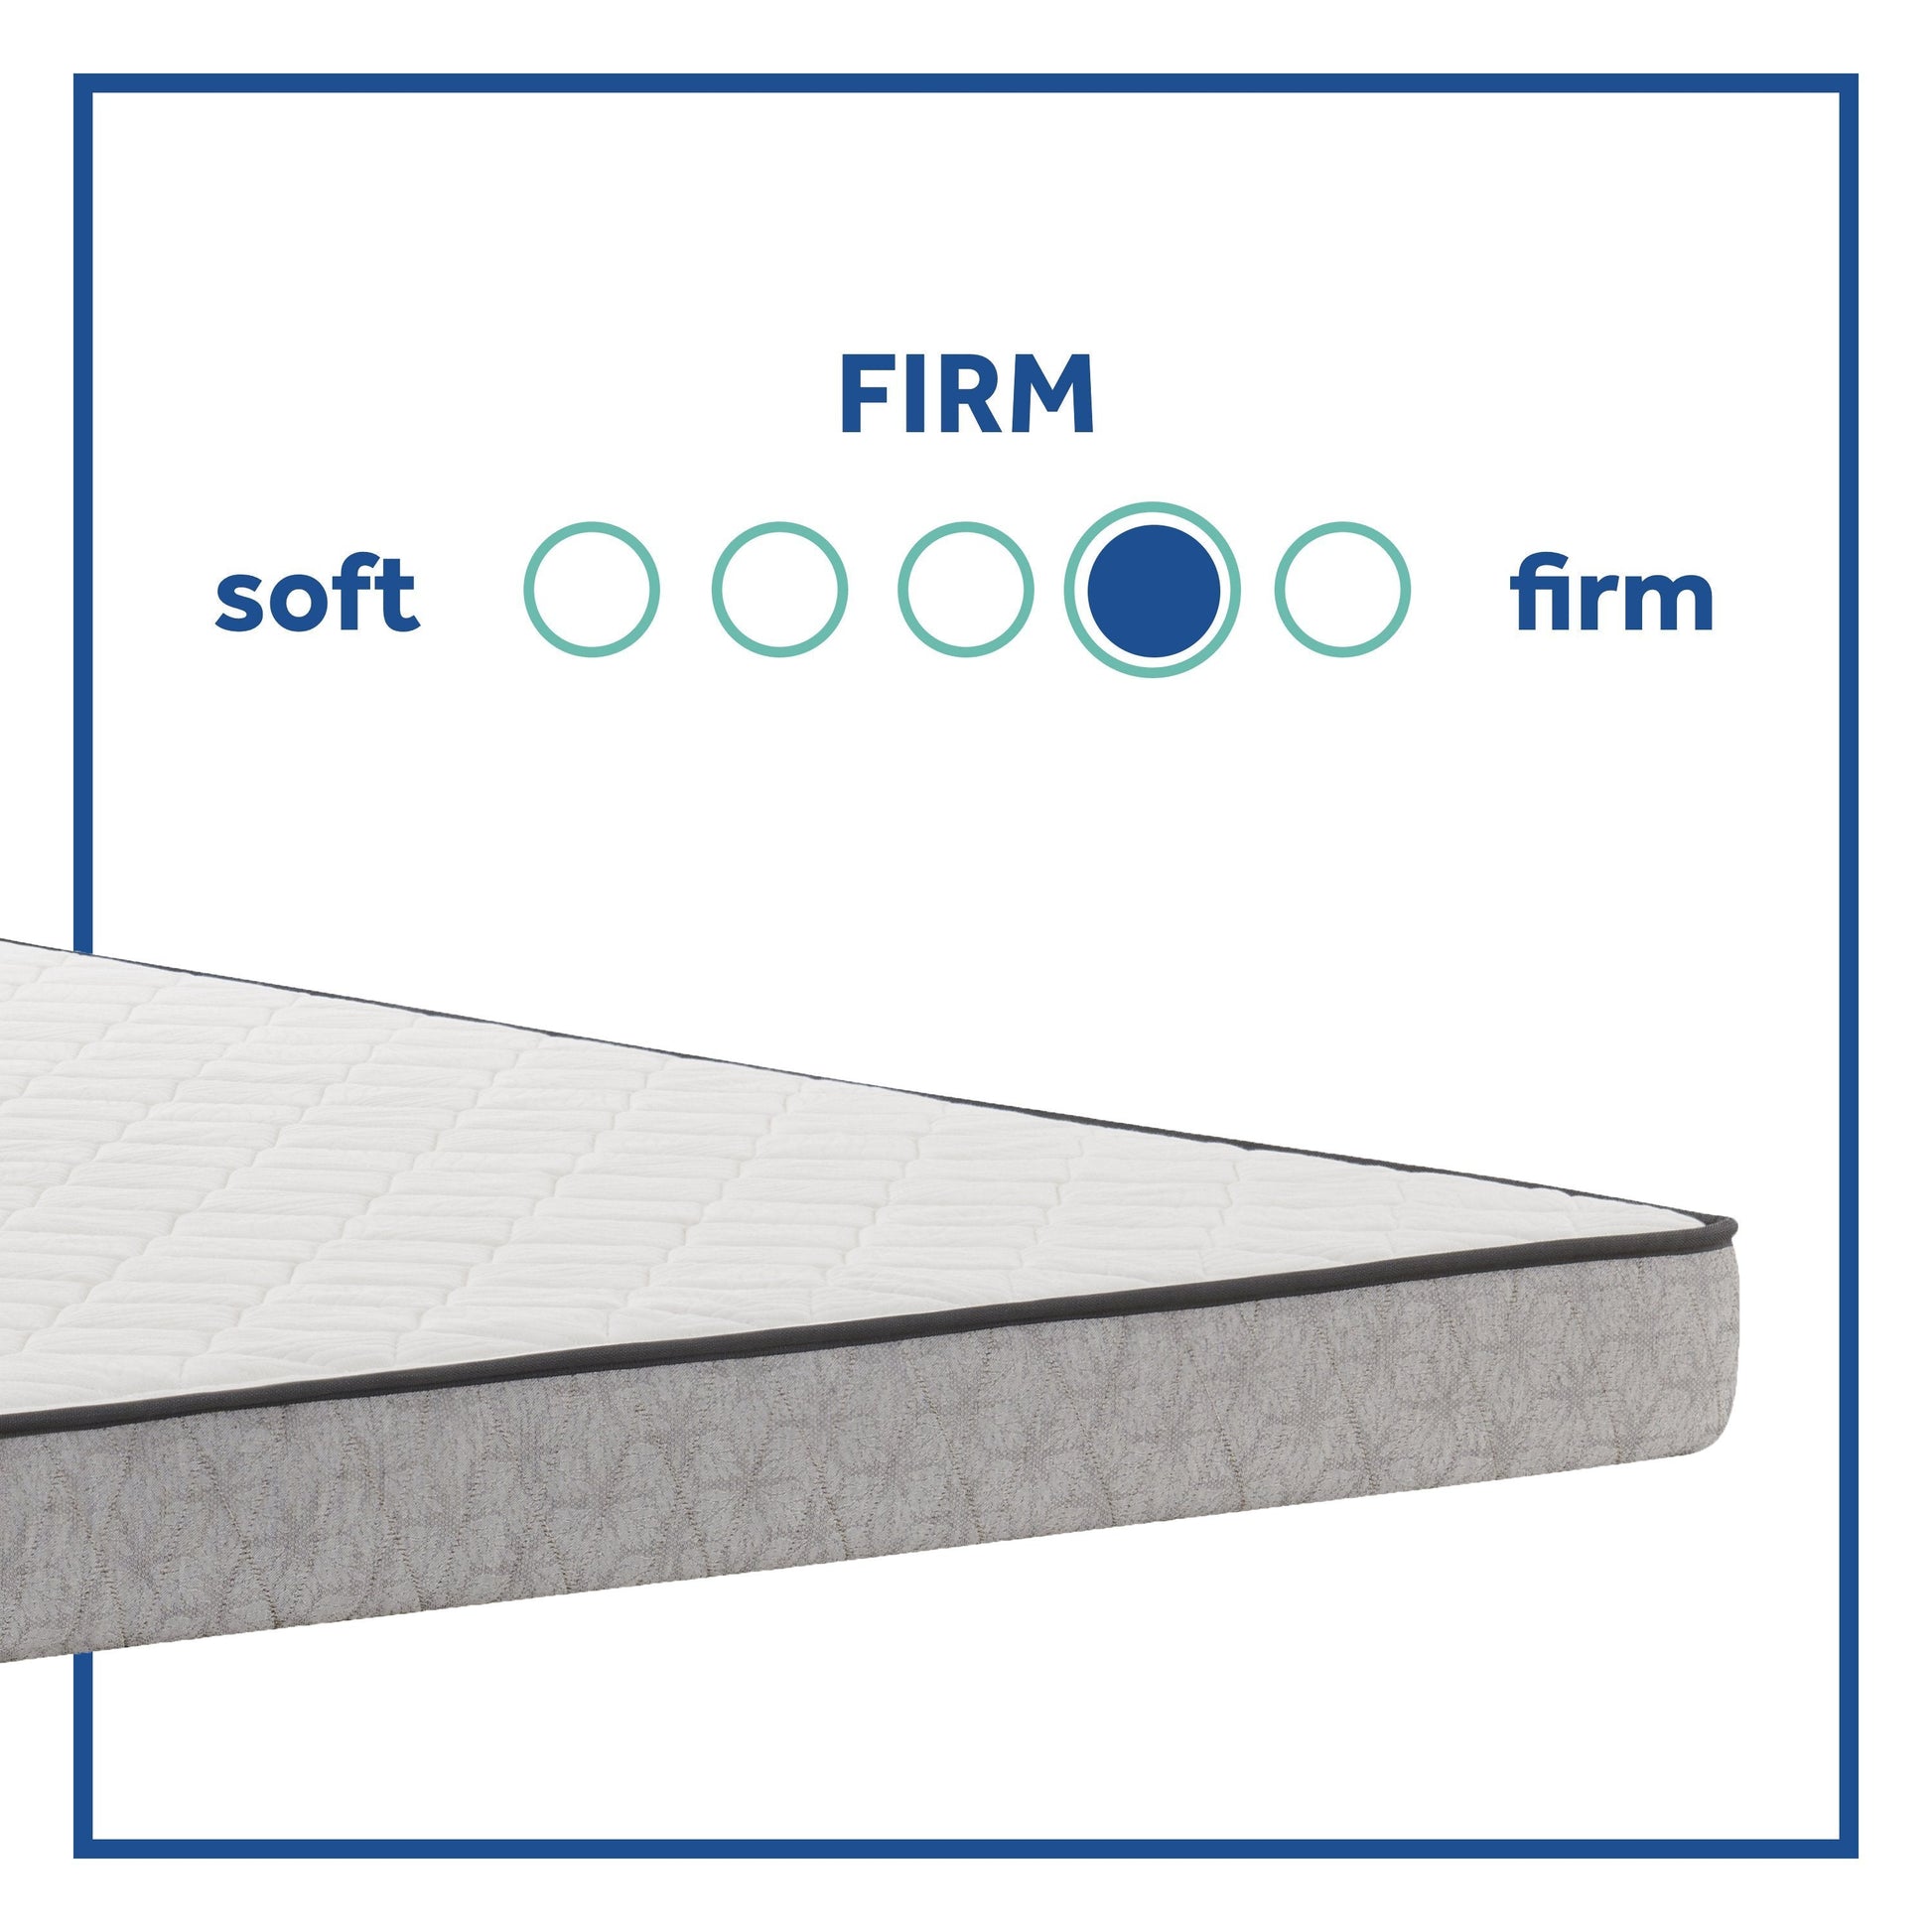 Sealy Altway Mattress Comfort Guide